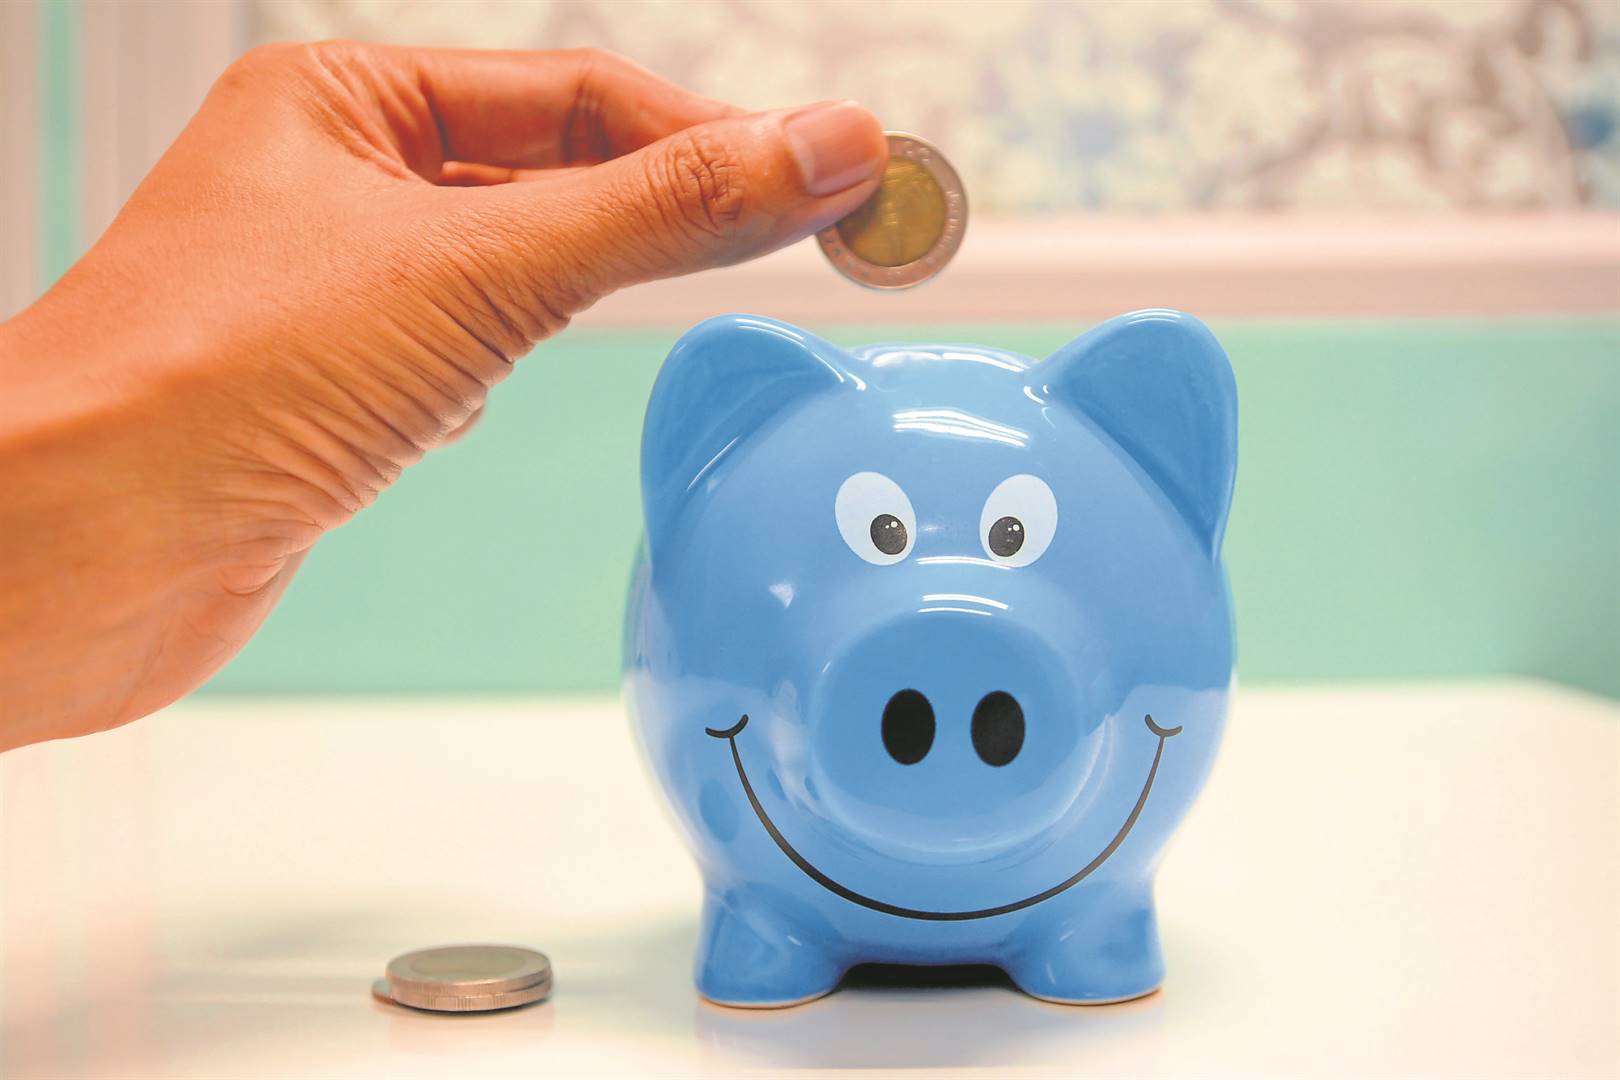 Consumers are urged to make informed financial decisions.PHOTO: Pexels